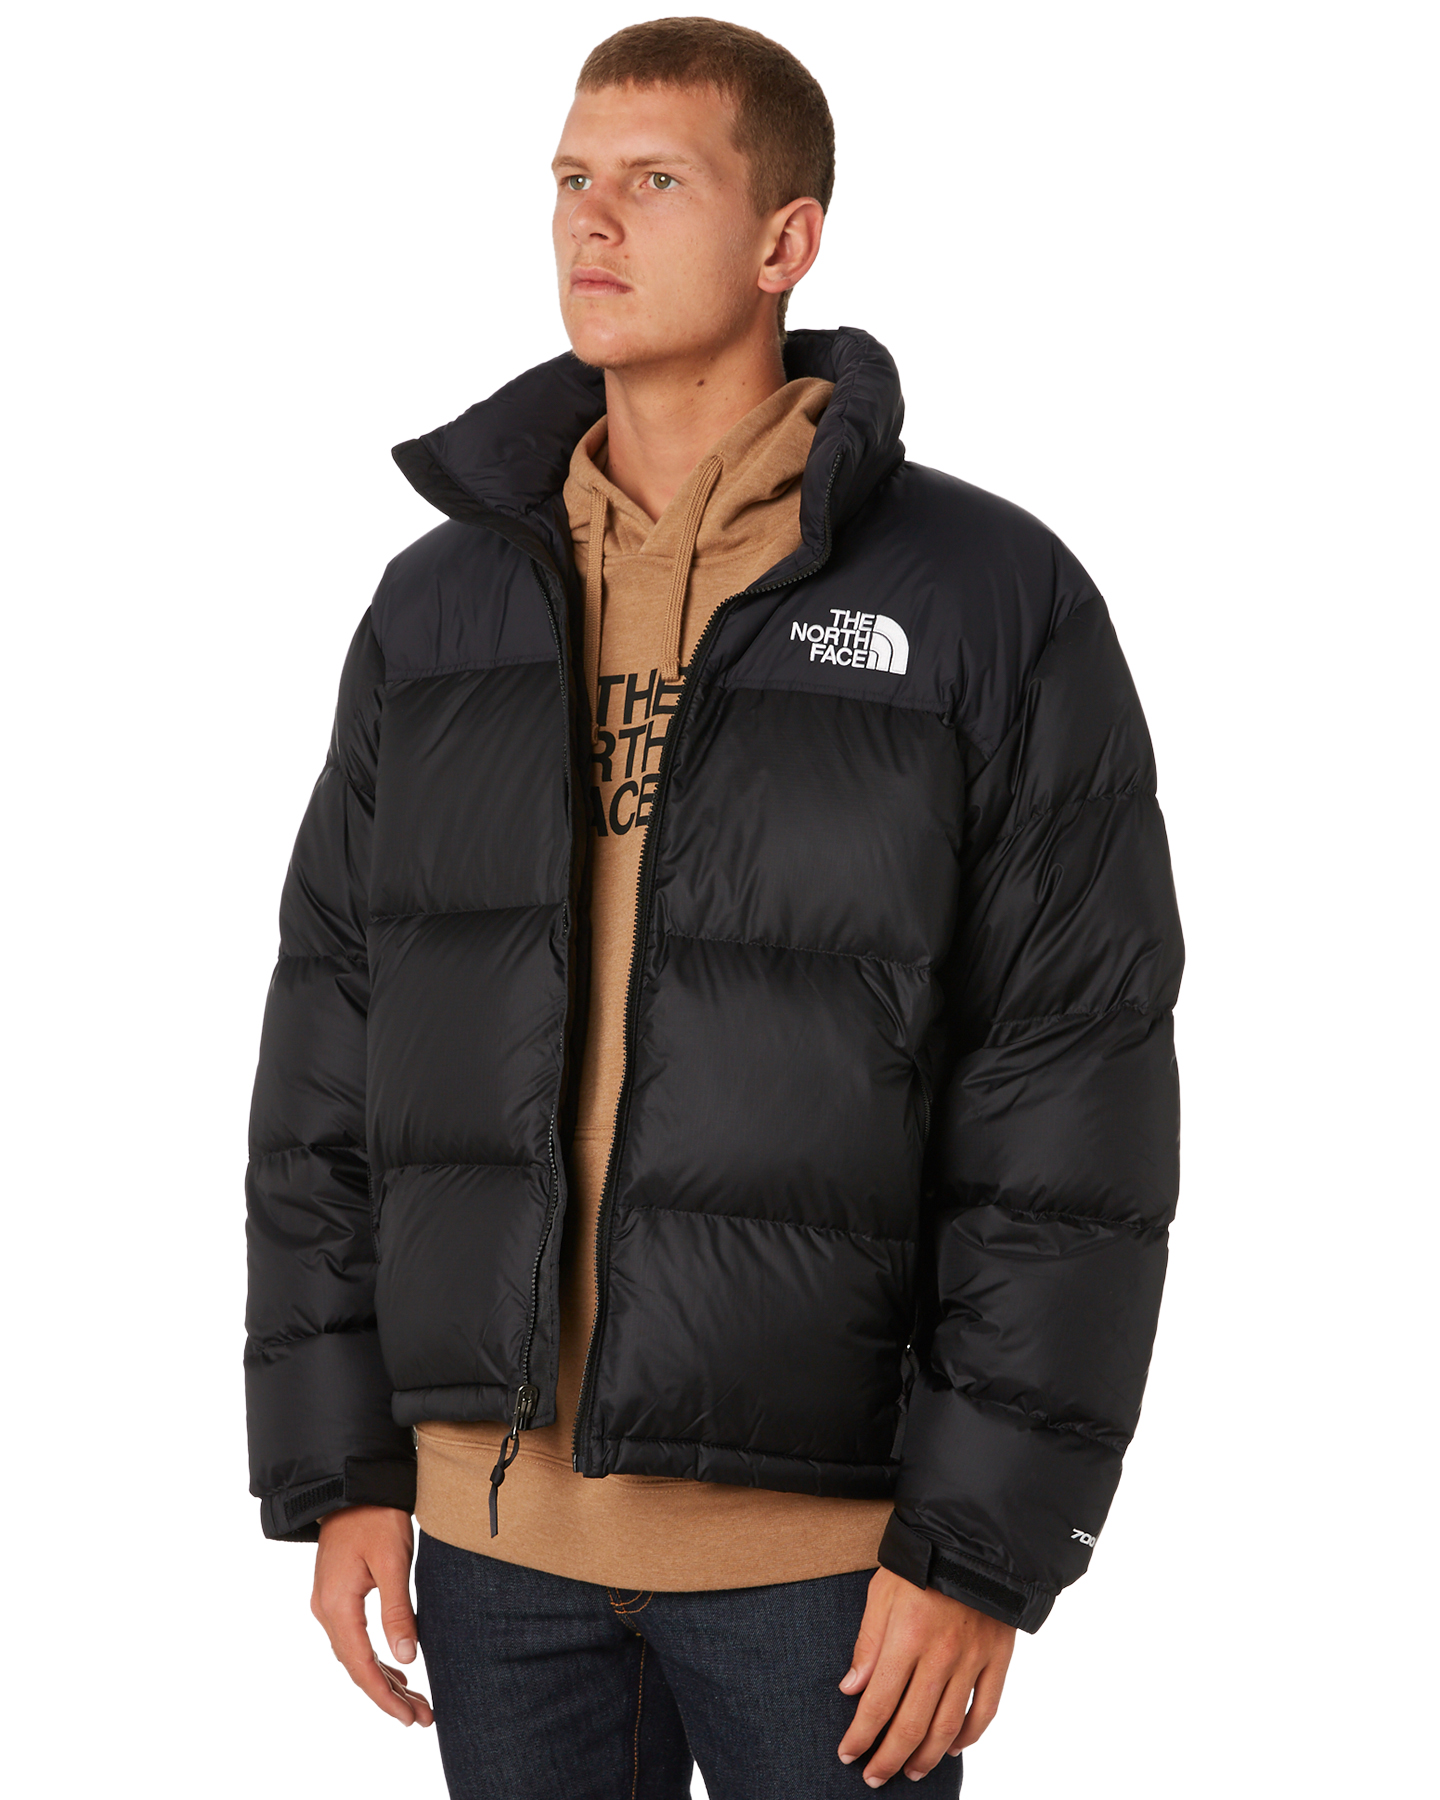 North face puffer jacket red and black 296550-North face puffer jacket ...